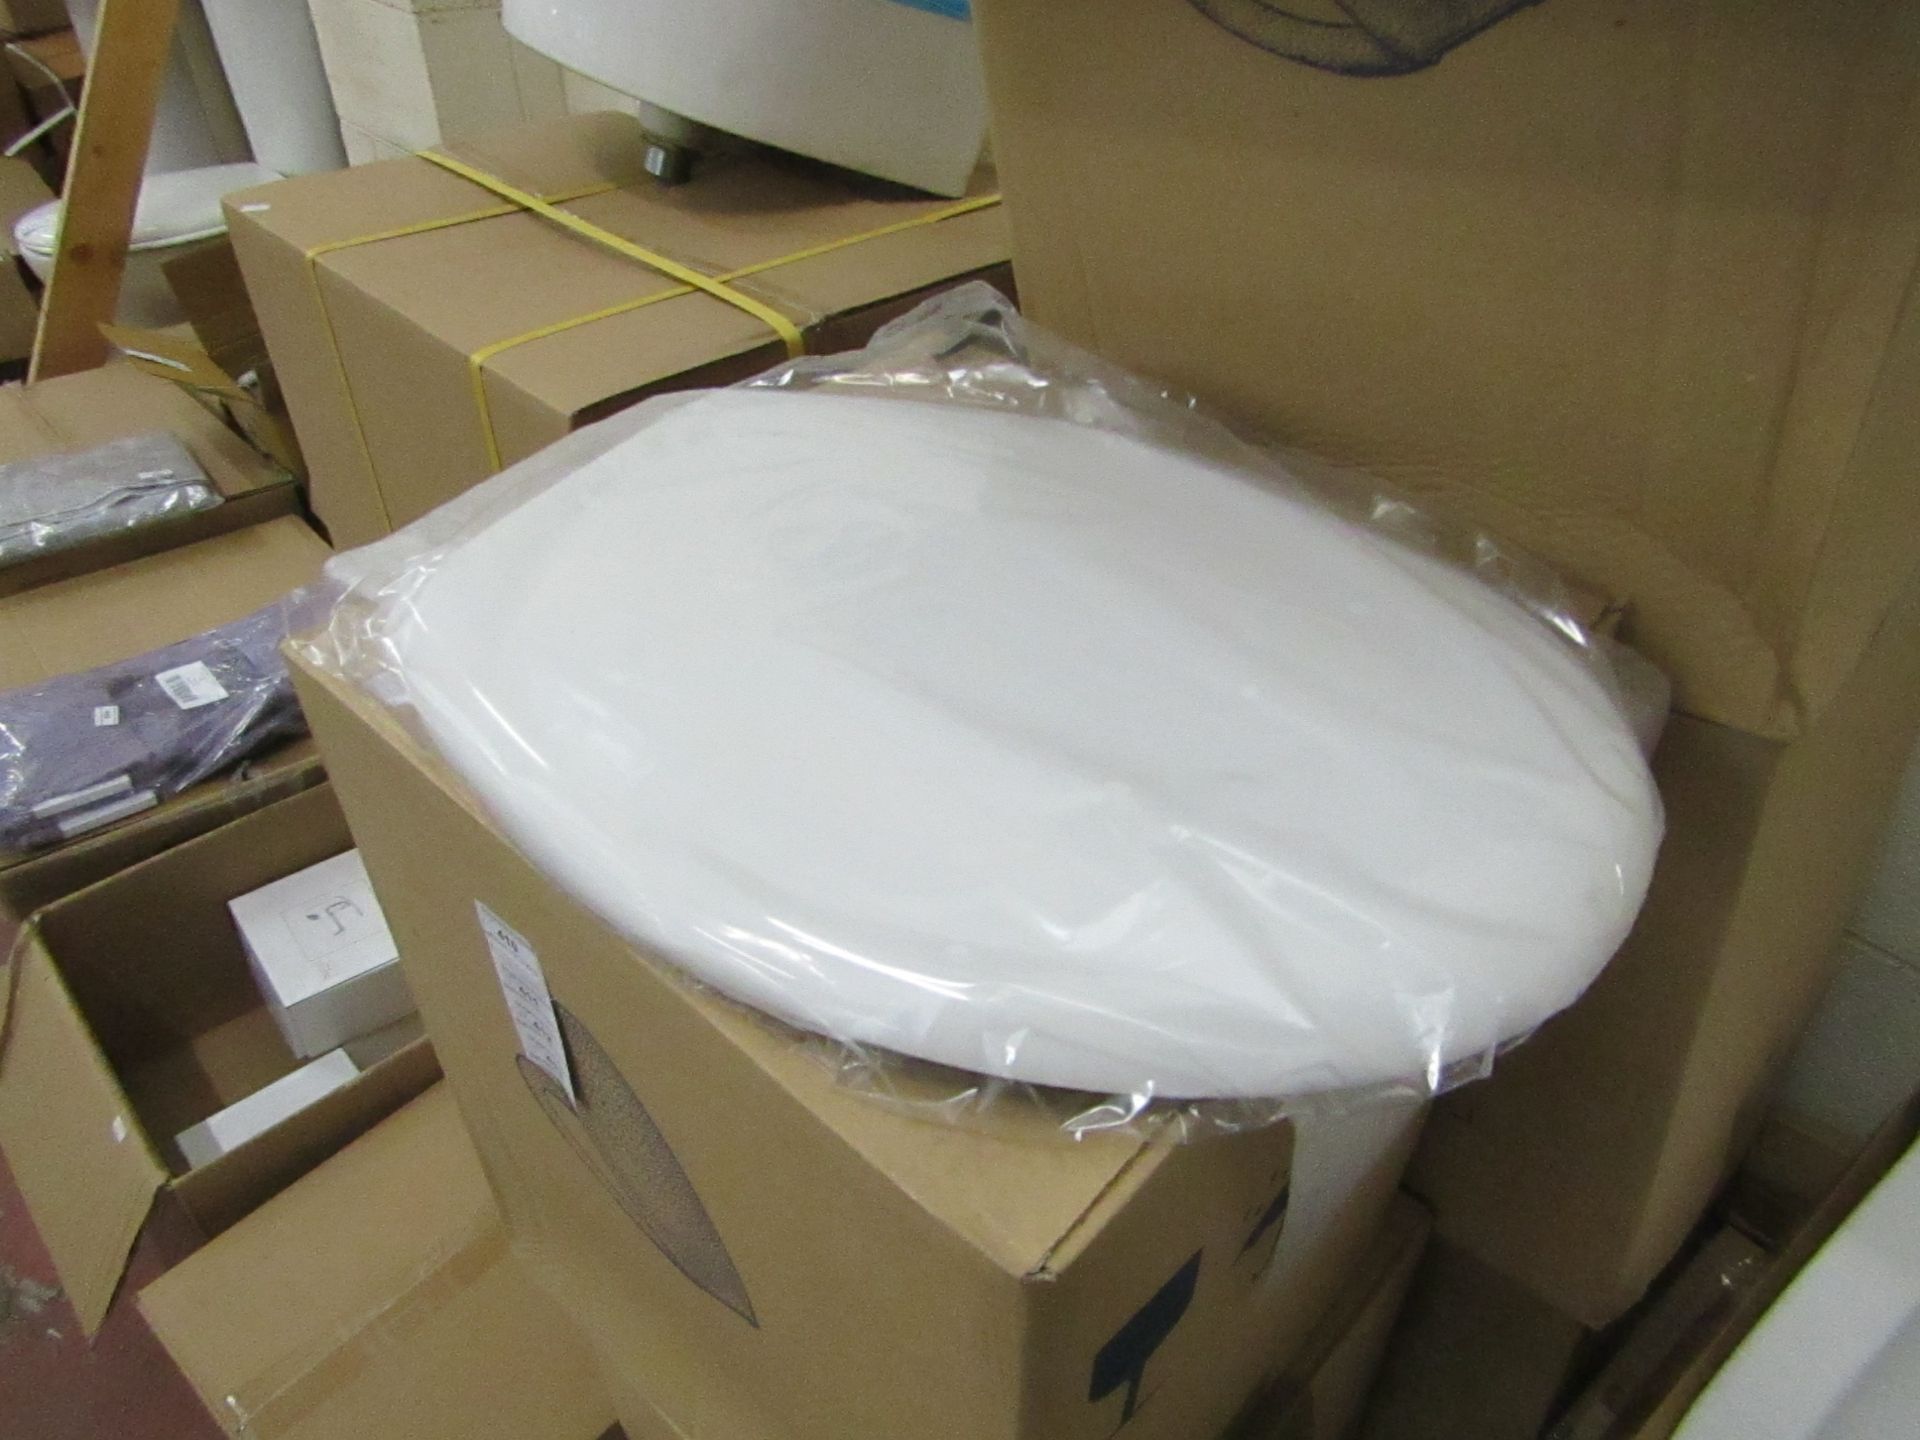 5x Unbranded Roca toilet seats, all new and packaged.